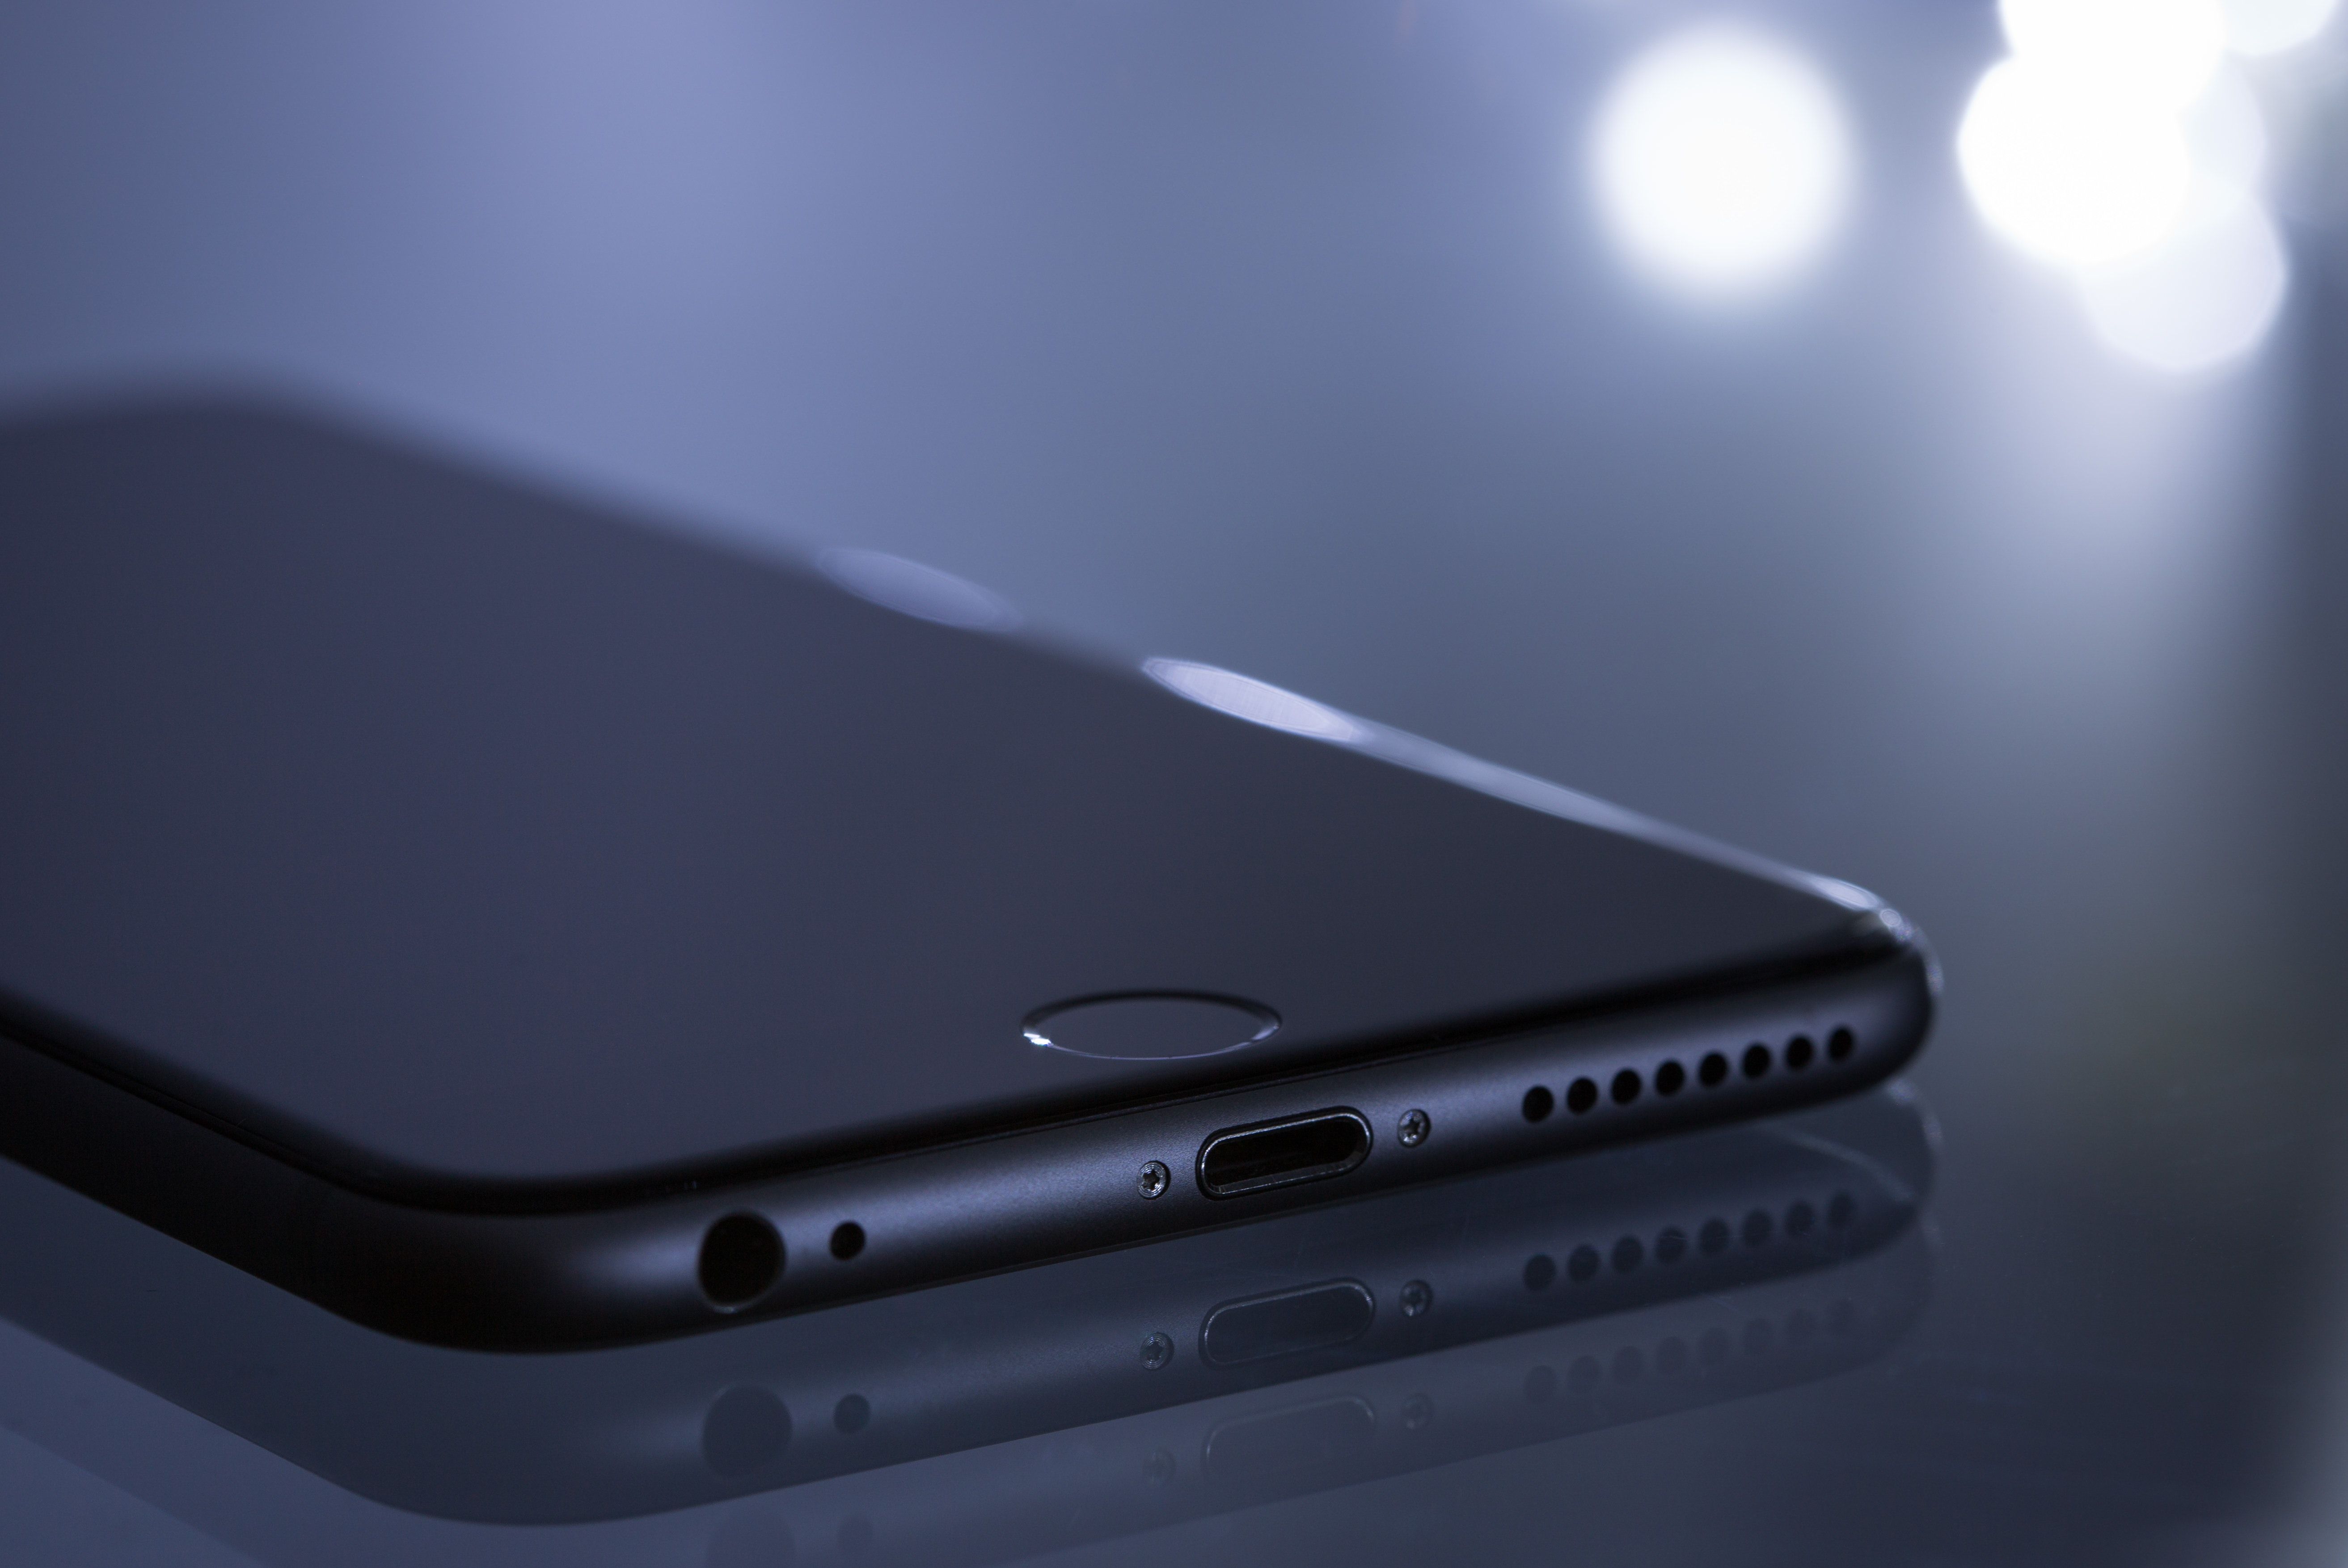 Black iPhone 6 on a glass table